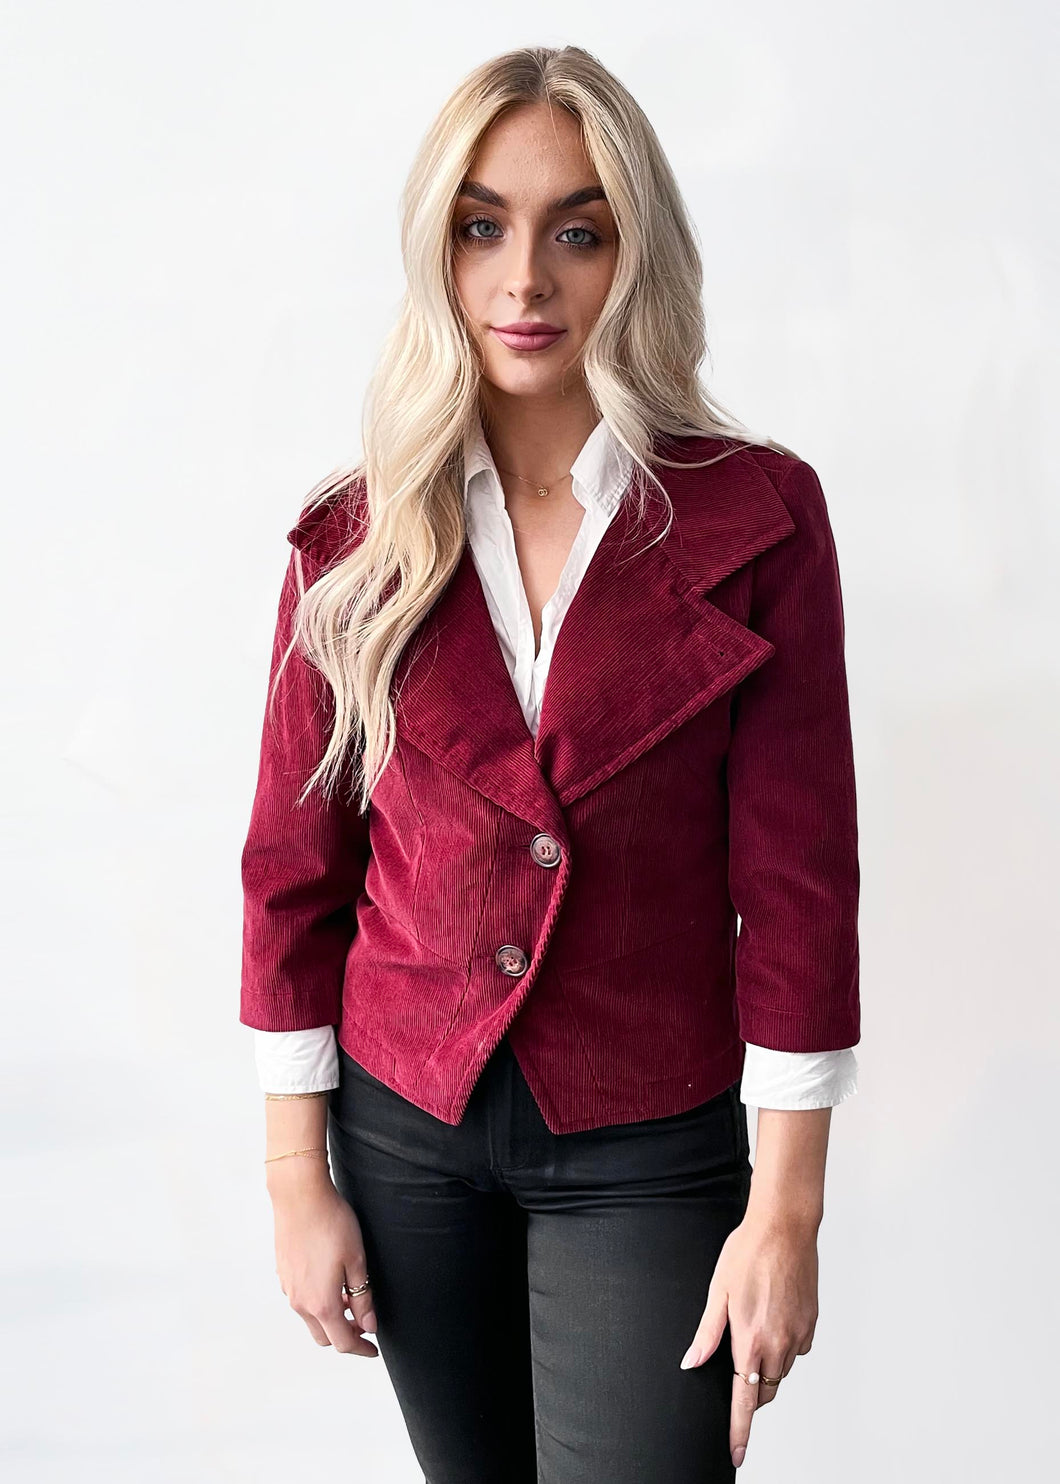 Elena in Burgundy - Limited edition of 3